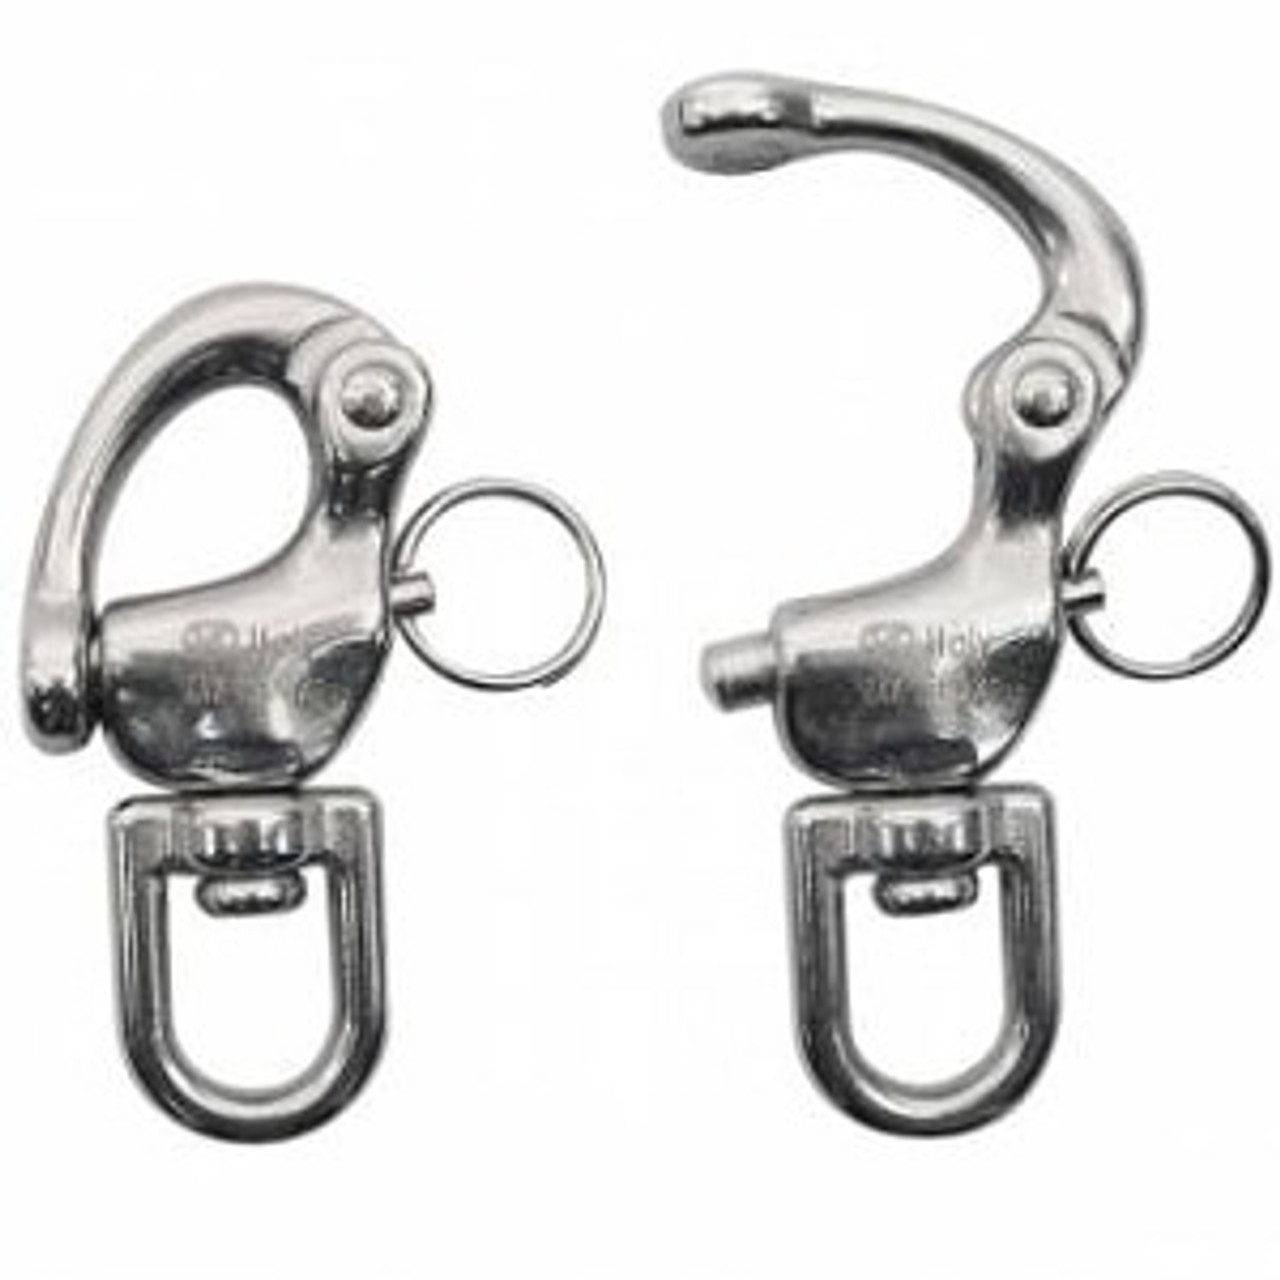 Quick Release Swivel Snap Boat Shackle Stainless Steel Marine Yacht Shackle